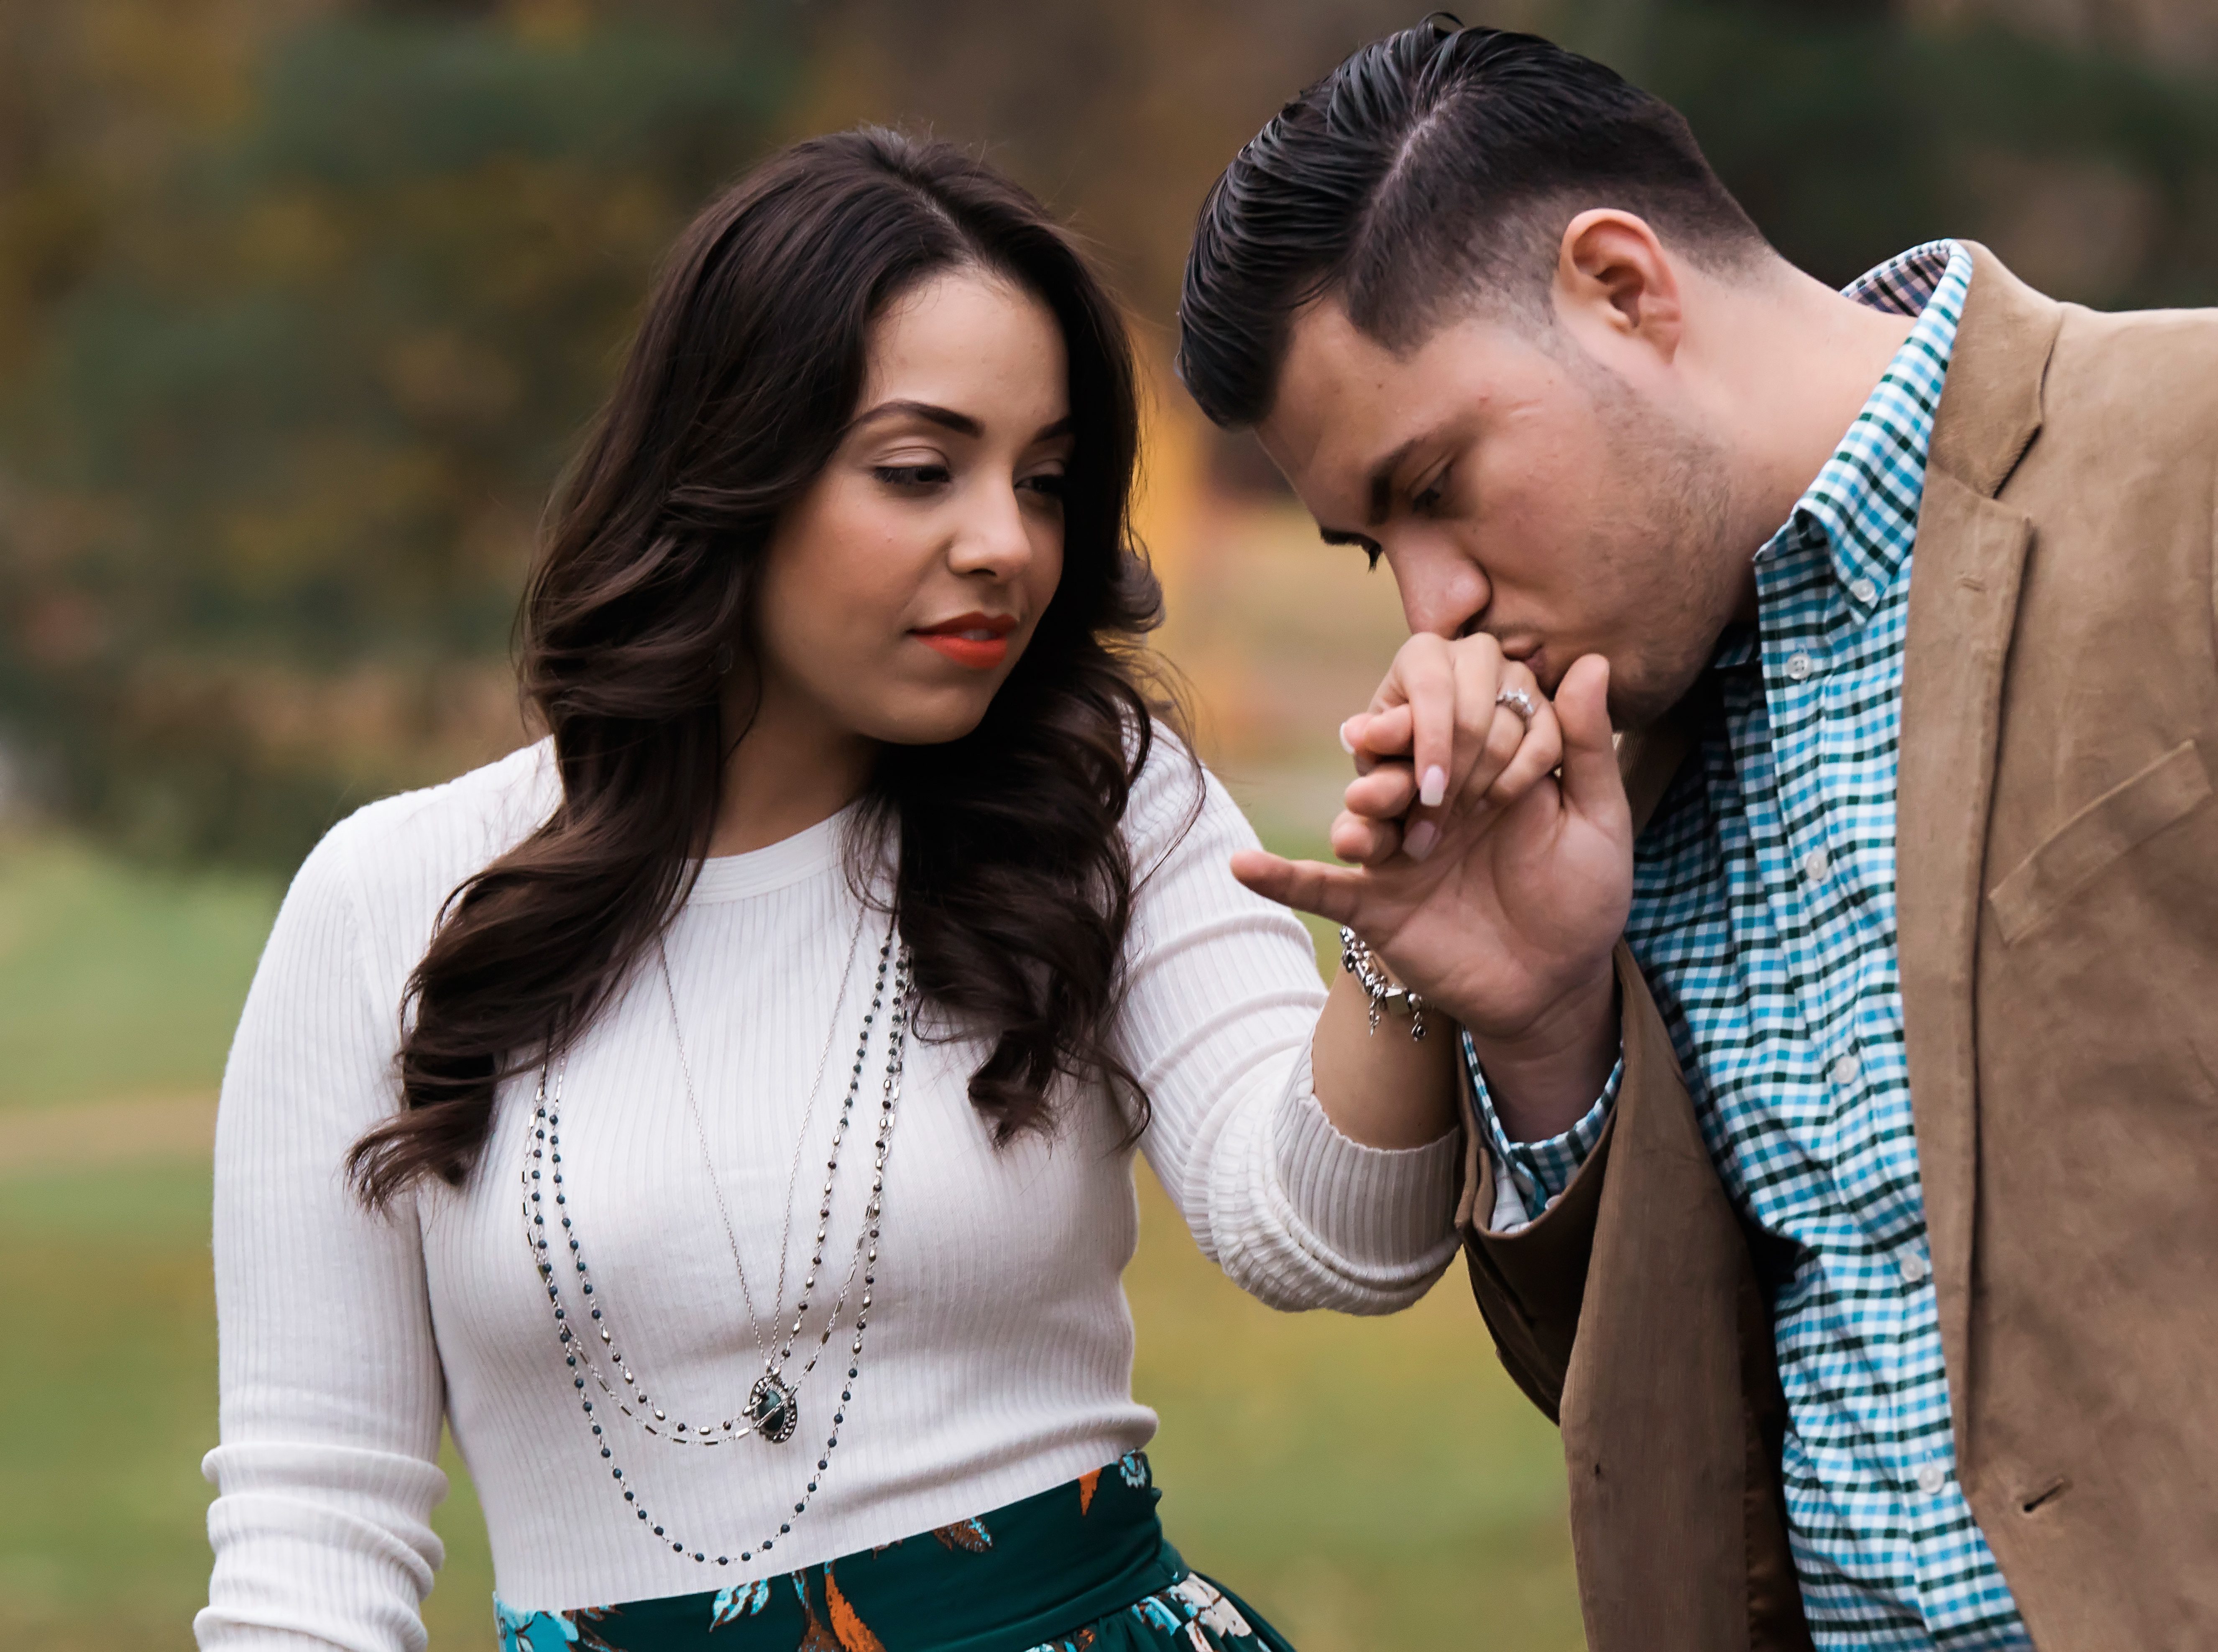 Valley Forge Engagement Photo